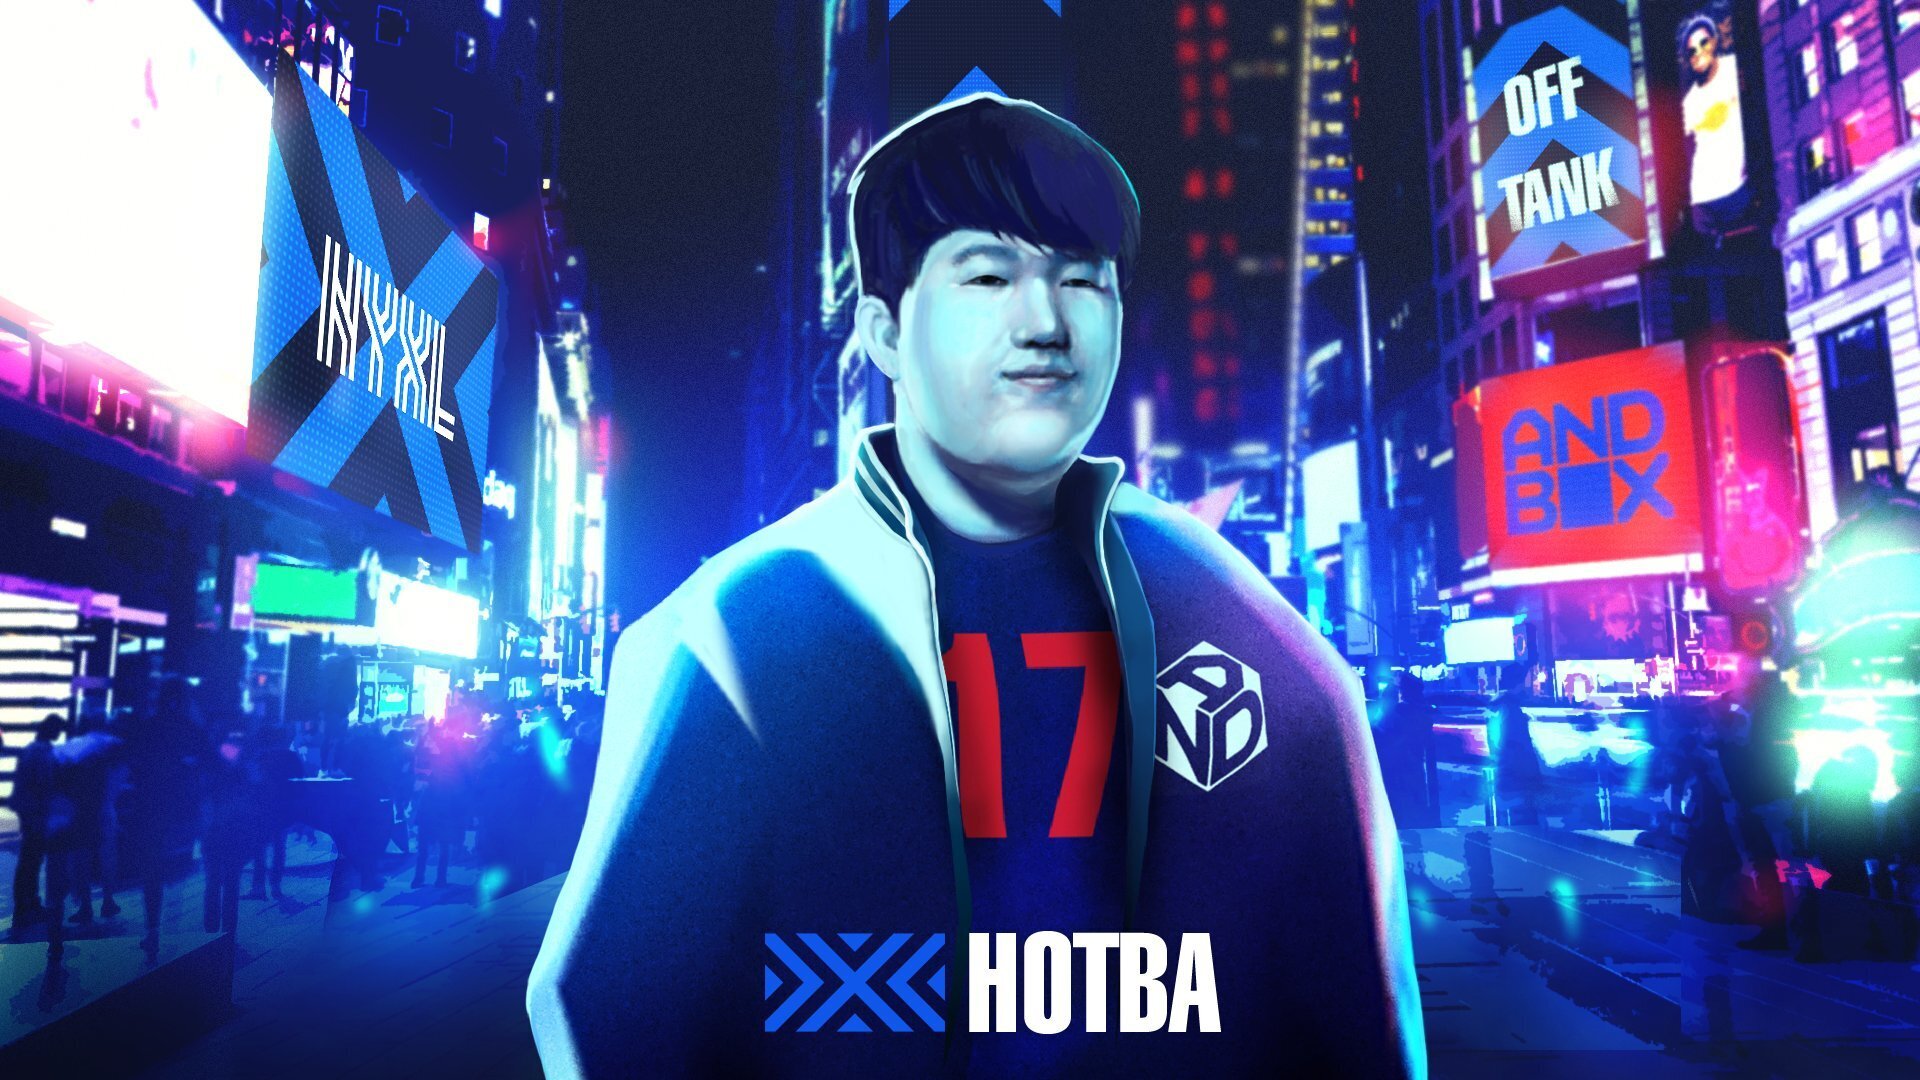 HOTBA will be the new off-tank for New York in 2020. (Image via @NYXL / Twitter)